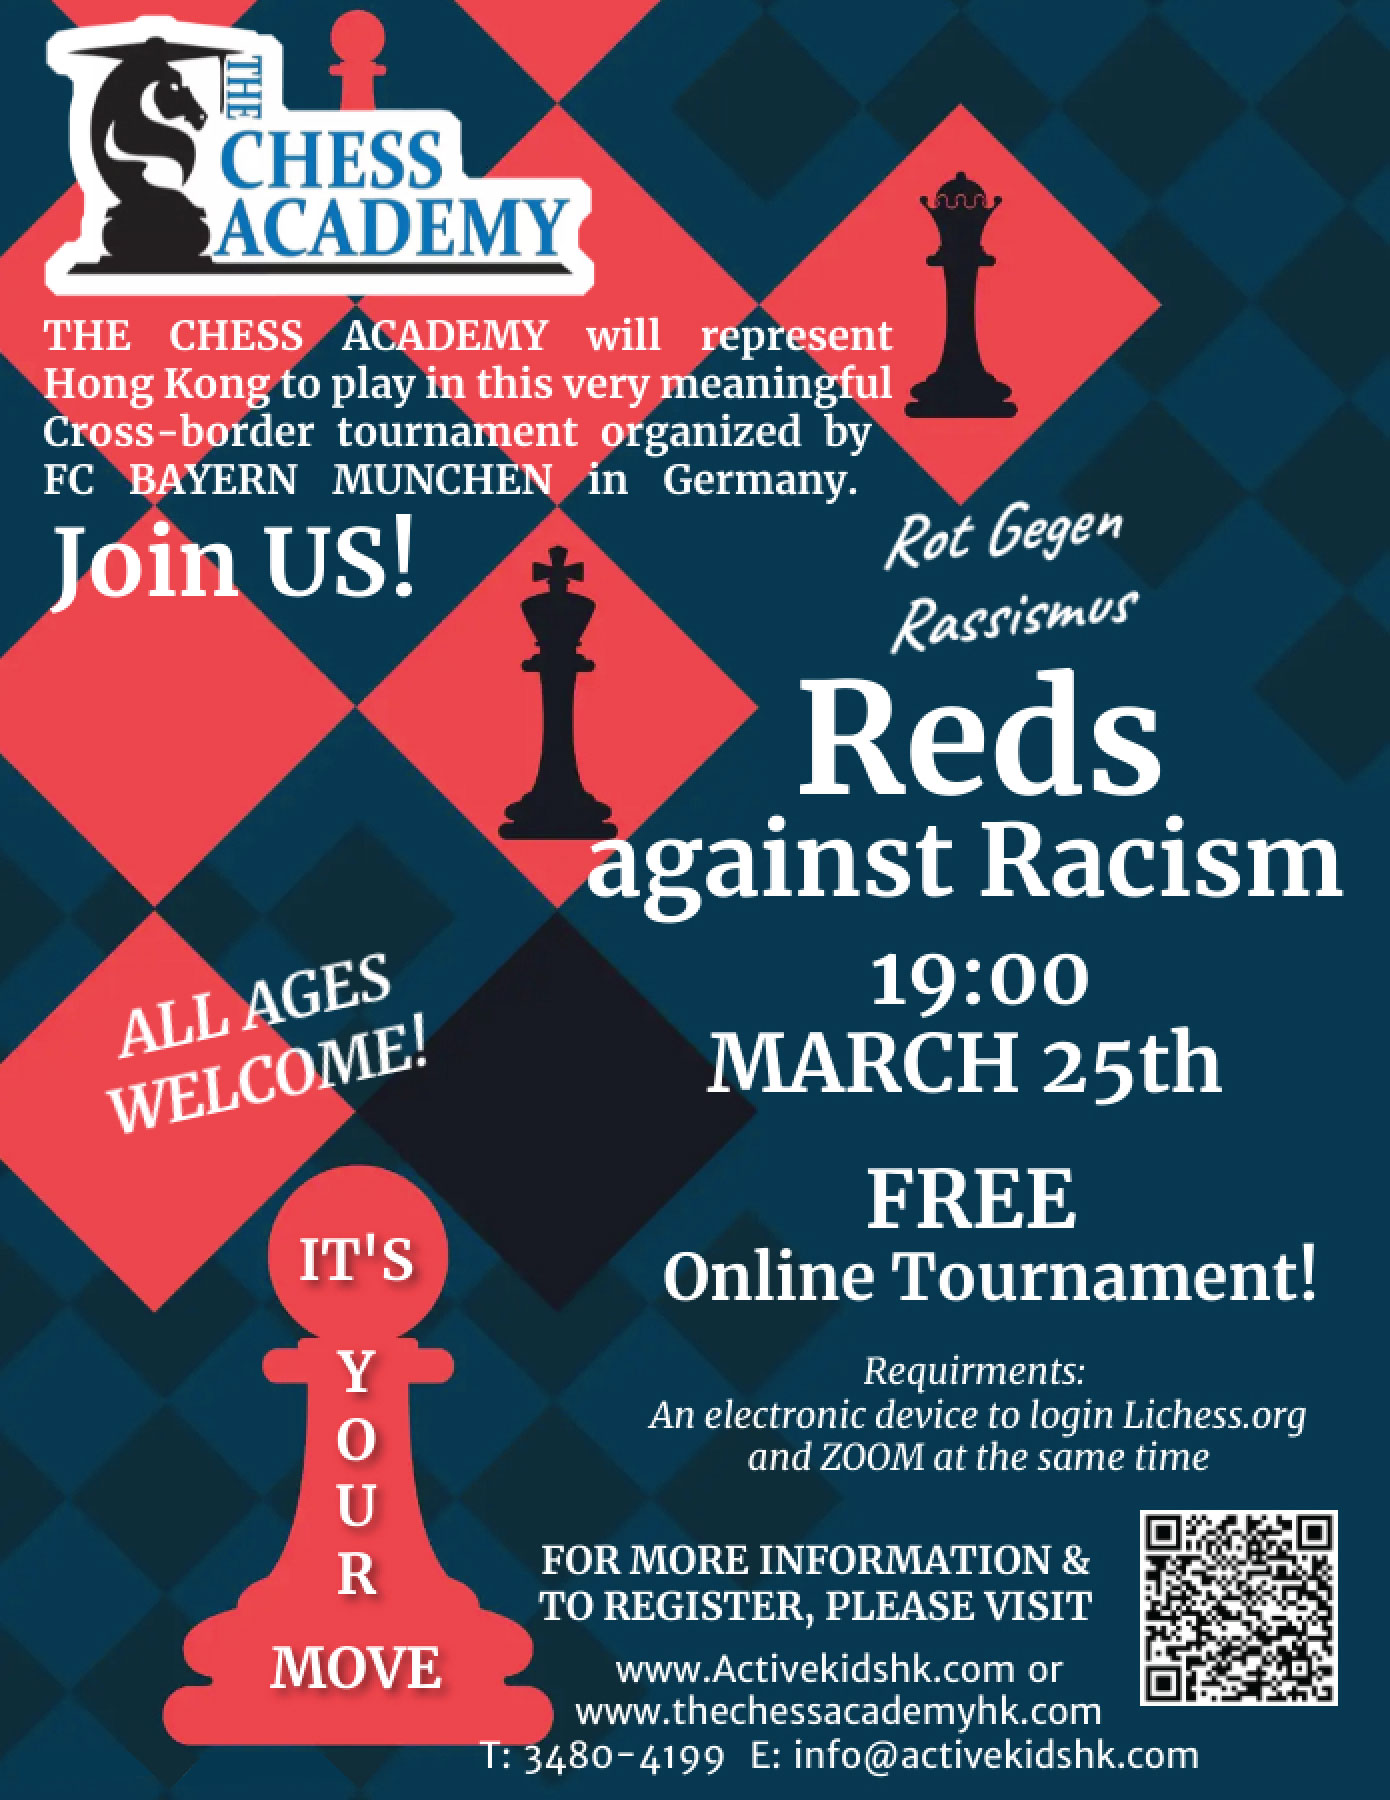 Reds against Racism” Online Tournament